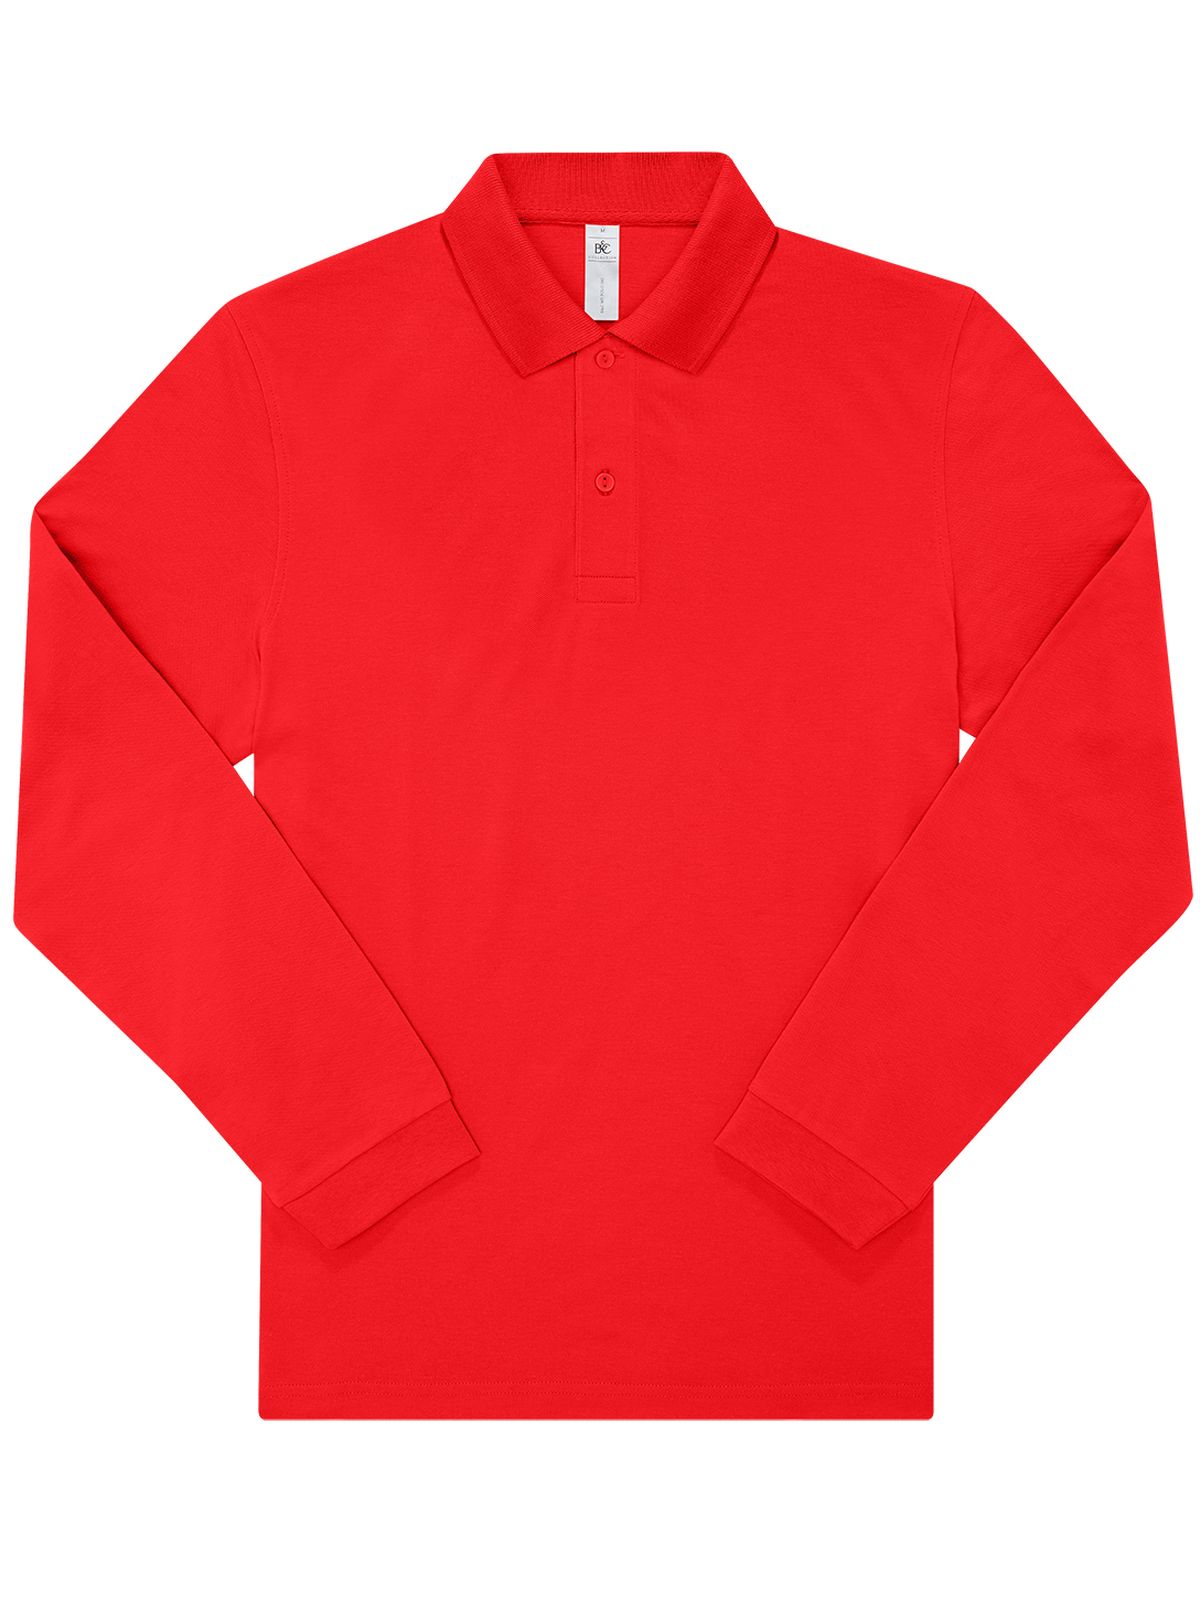 bc-my-polo-180-lsl-red.webp